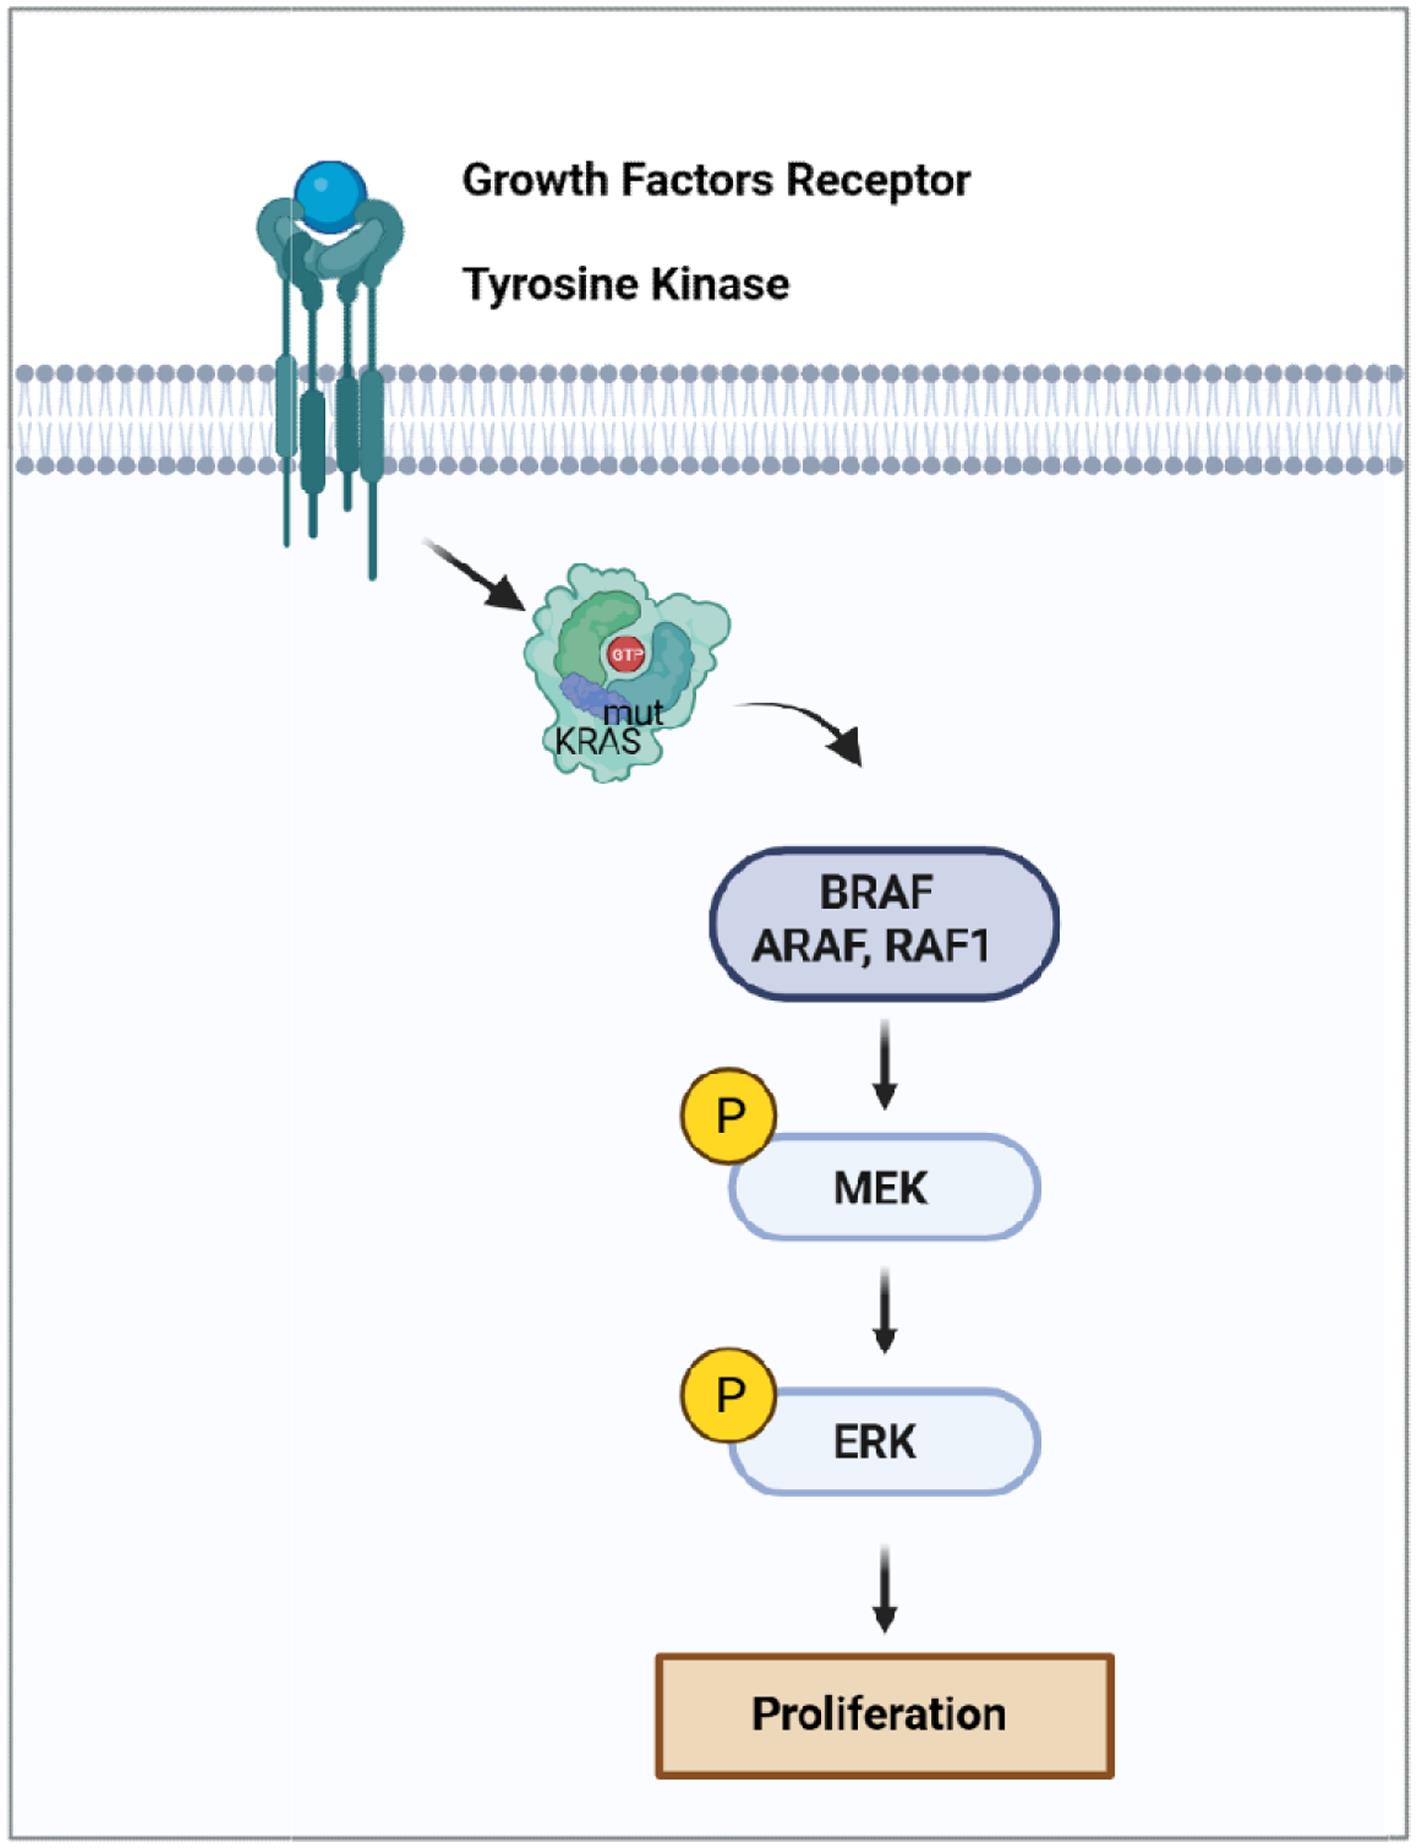 A schematic diagram showing oncogenic signaling pathways associated with mutated KRAS.